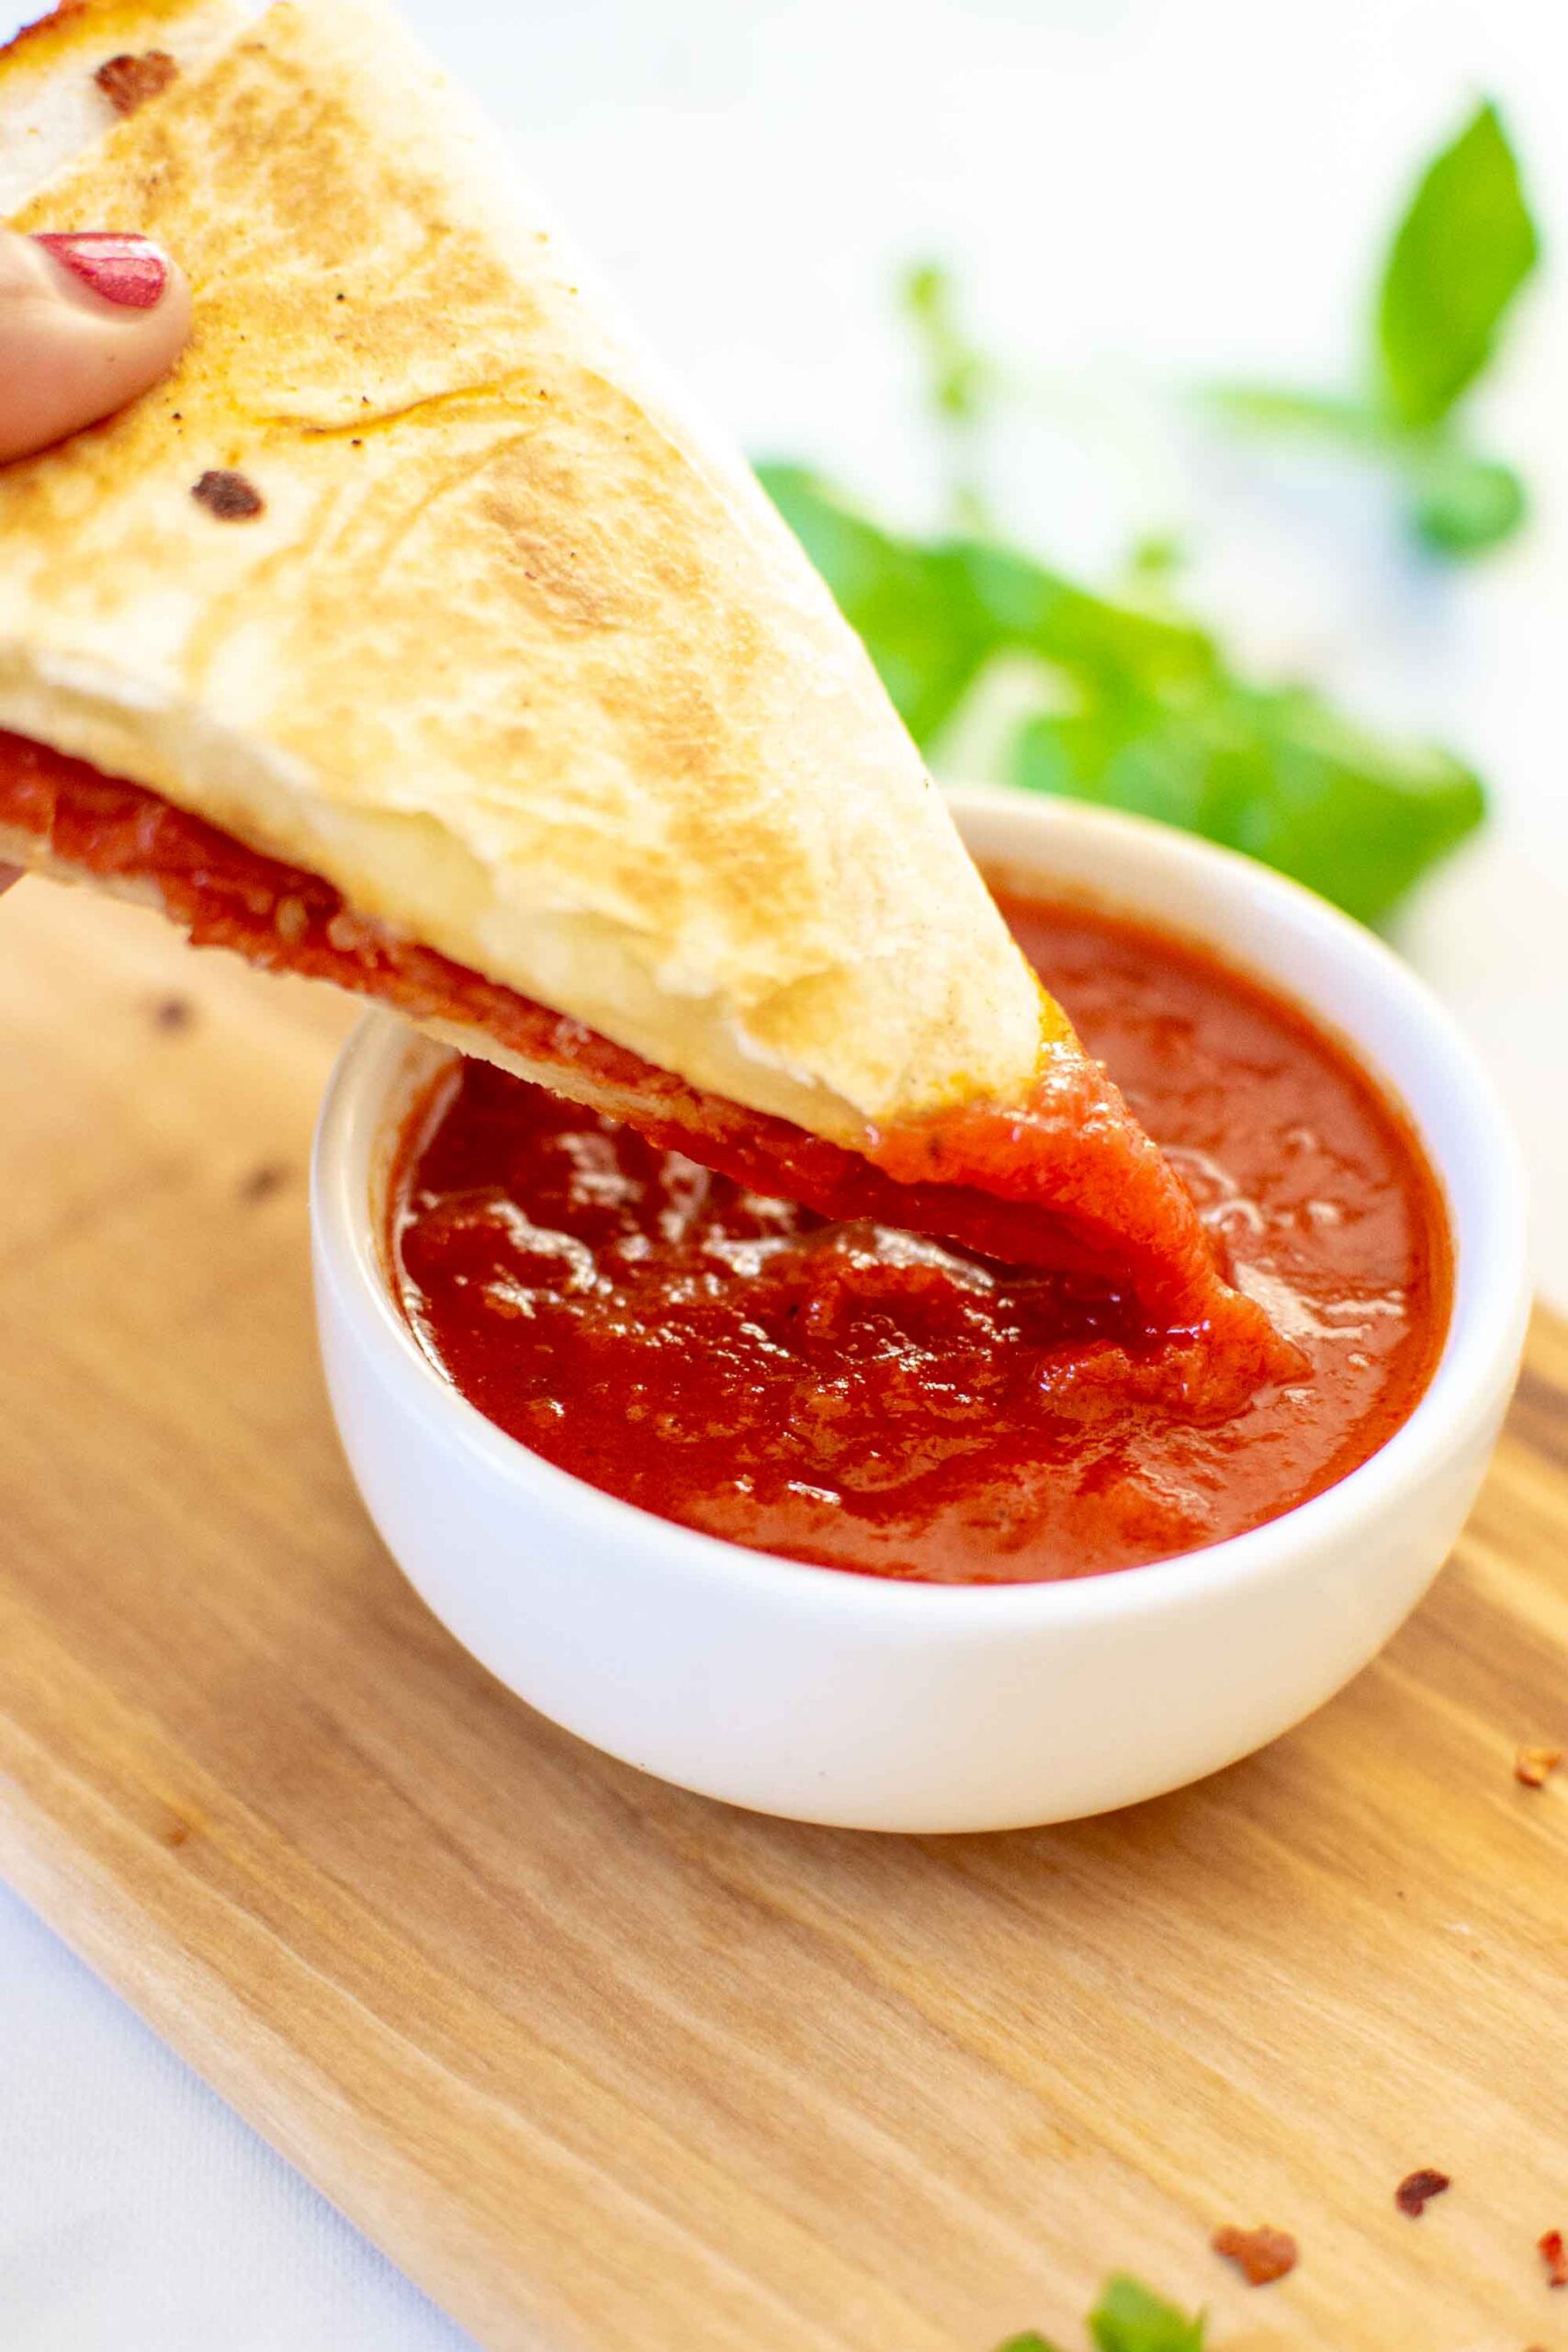 A person holding a slice of pizza wrap and dipping it into the pizza sauce.